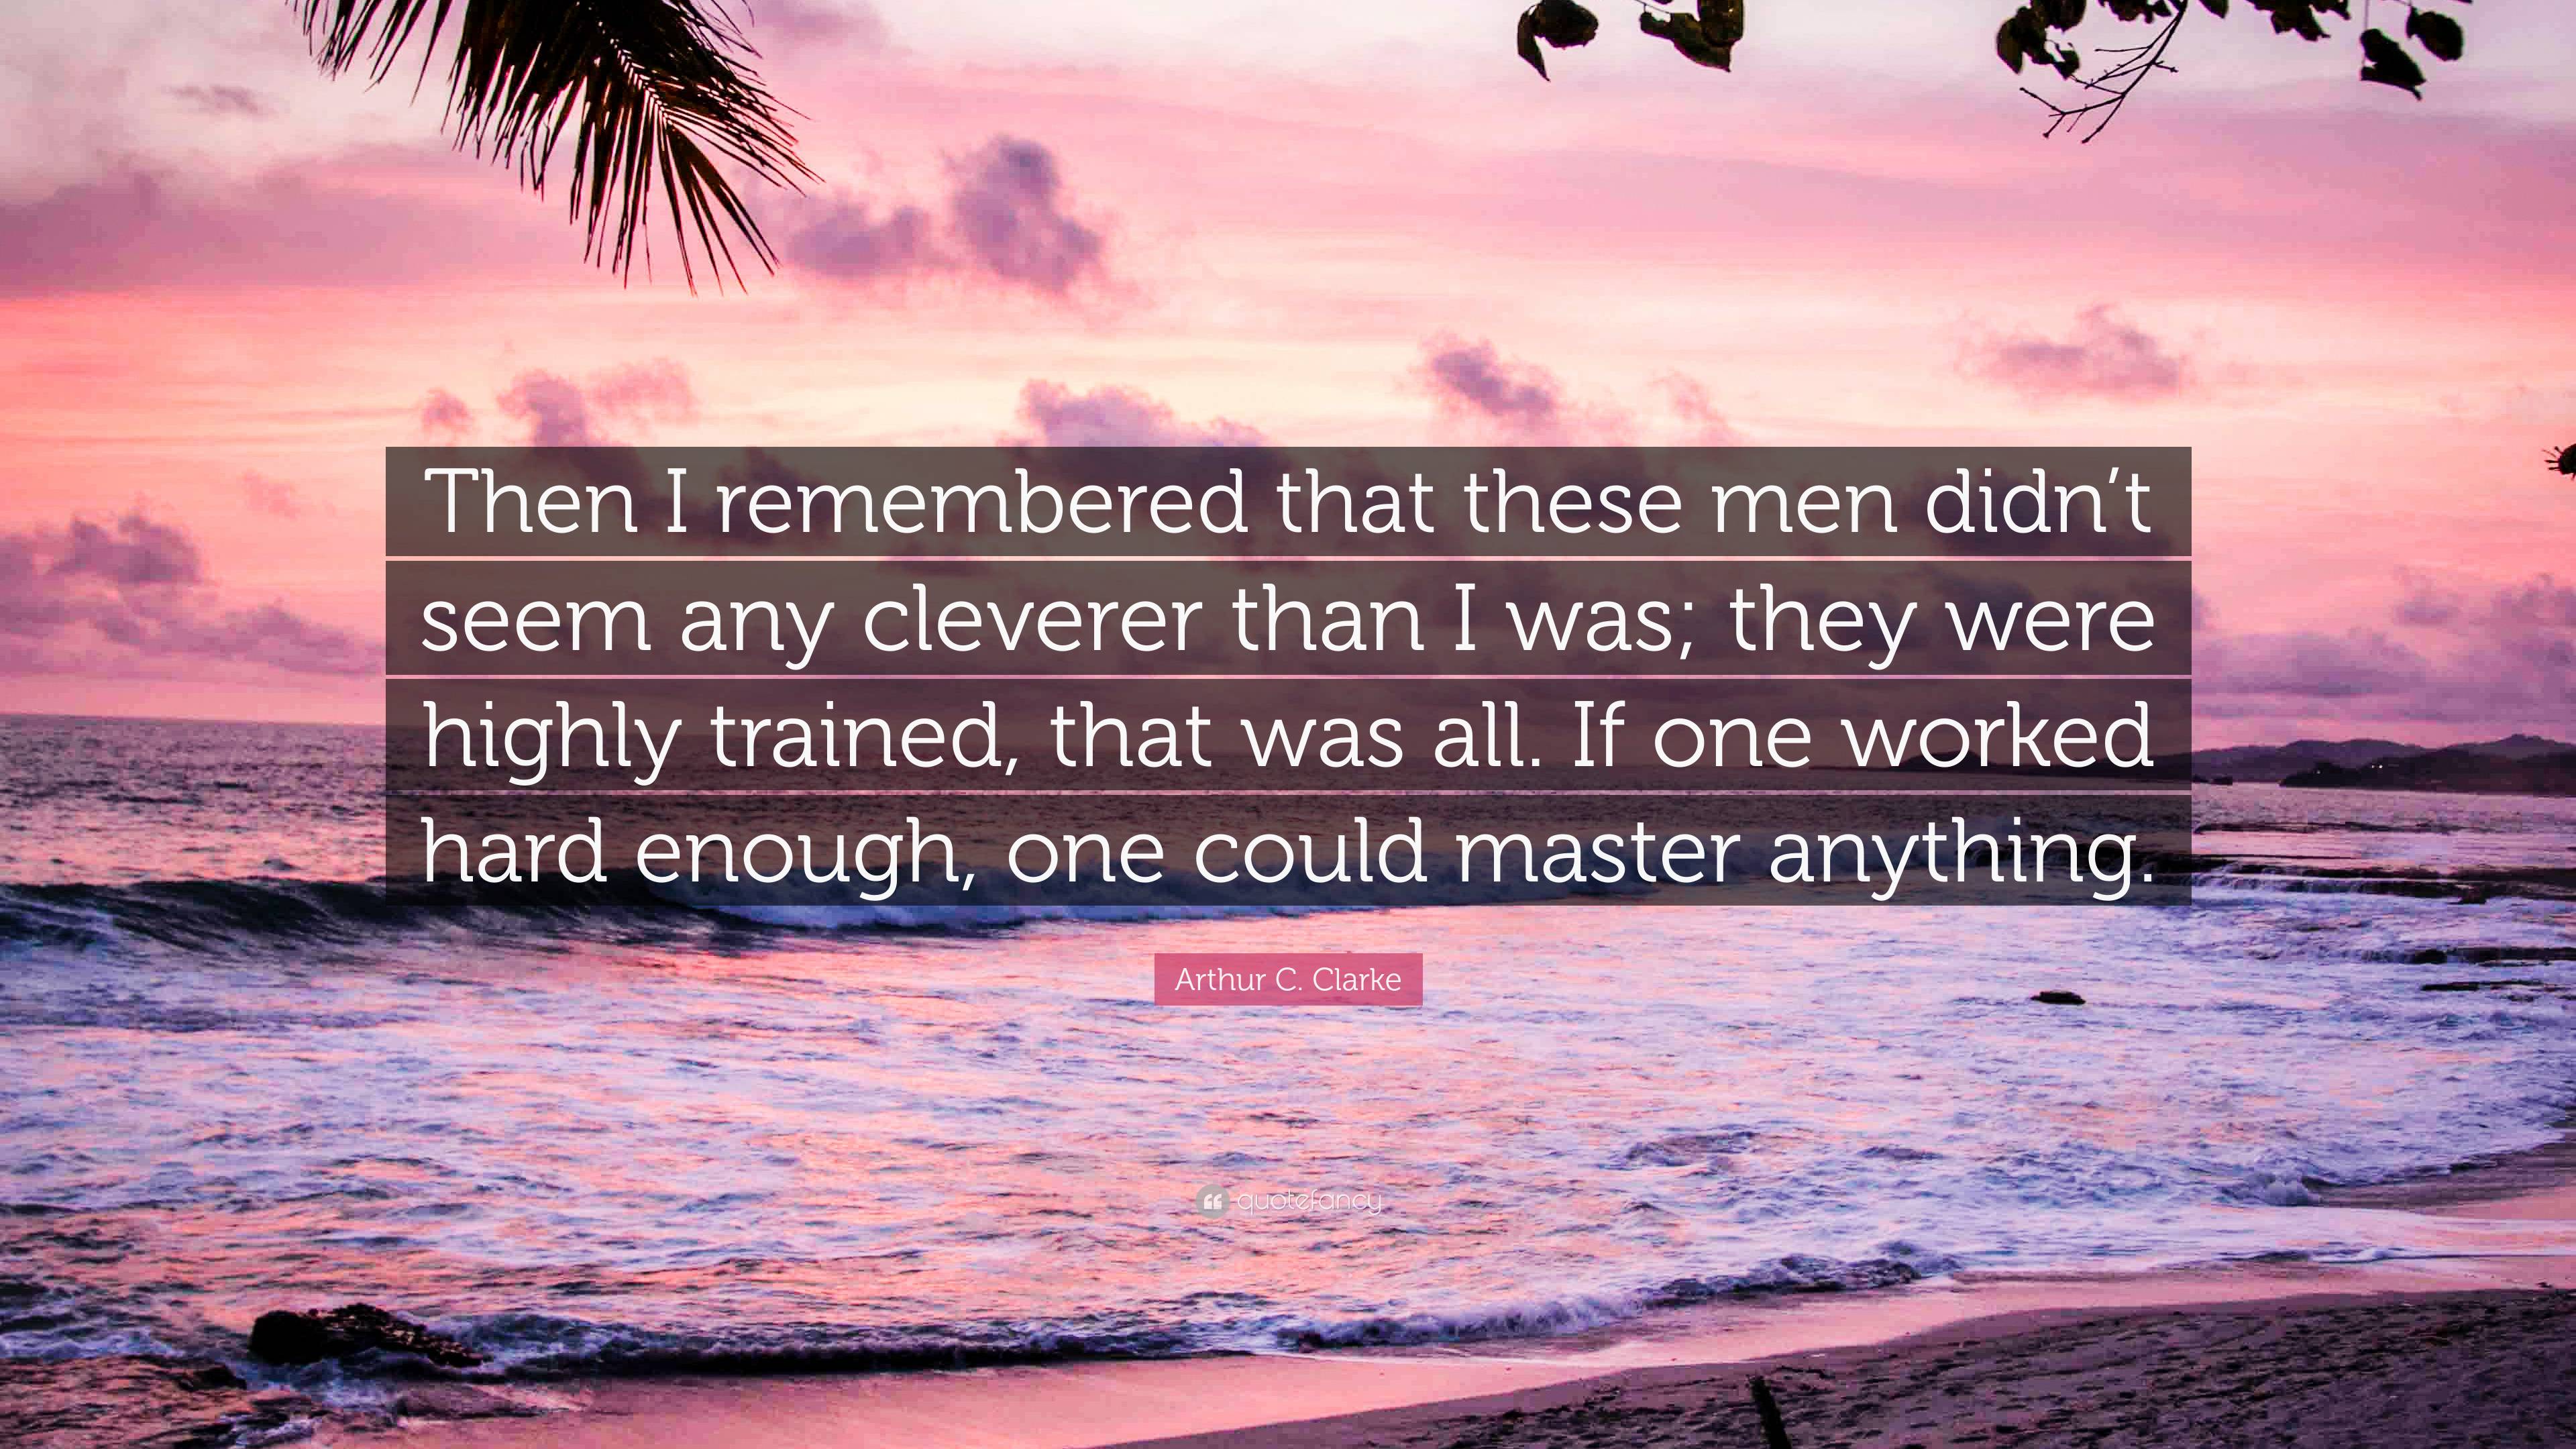 Arthur C. Clarke Quote: “Then I remembered that these men didn’t seem ...